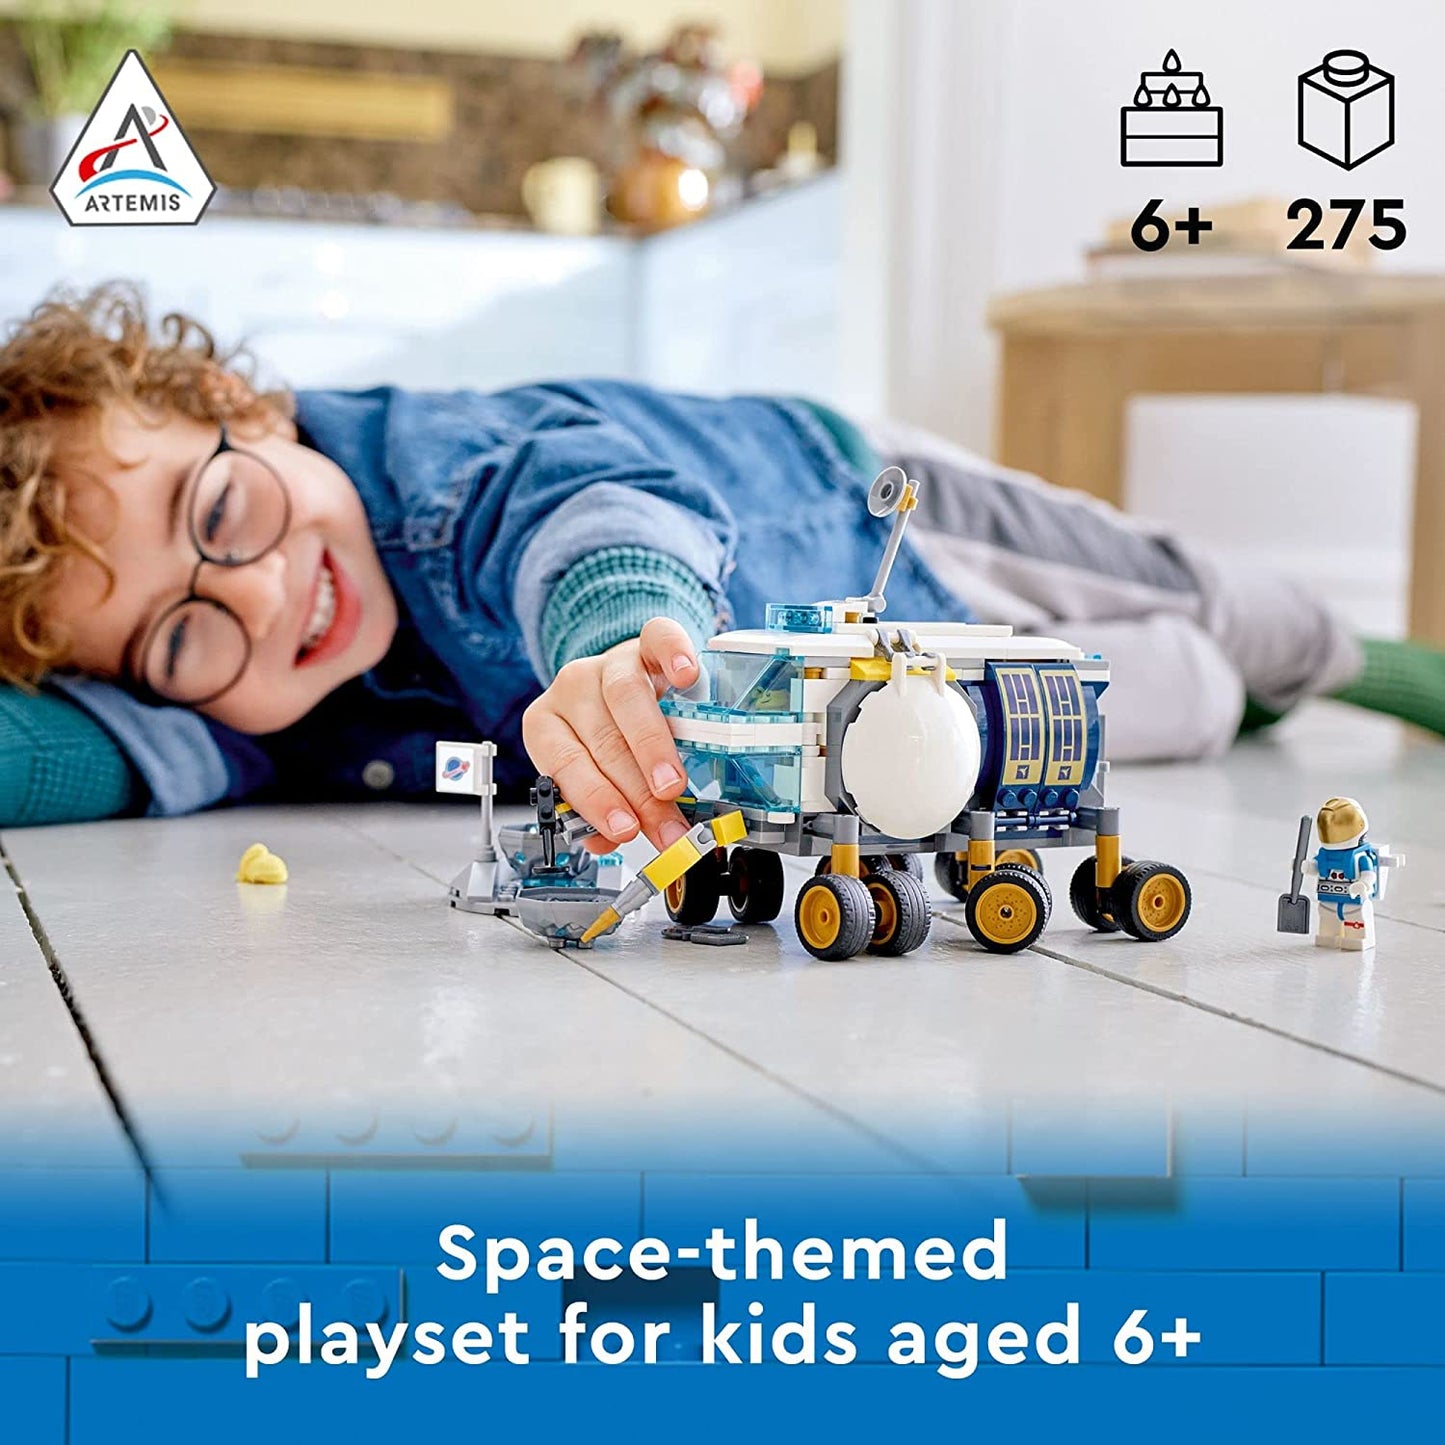 LEGO City Lunar Roving Vehicle 60348 Building Kit; Space Toy for Kids Aged 6 and Up; Includes a Planet Rover, Moon Meteorite Setting